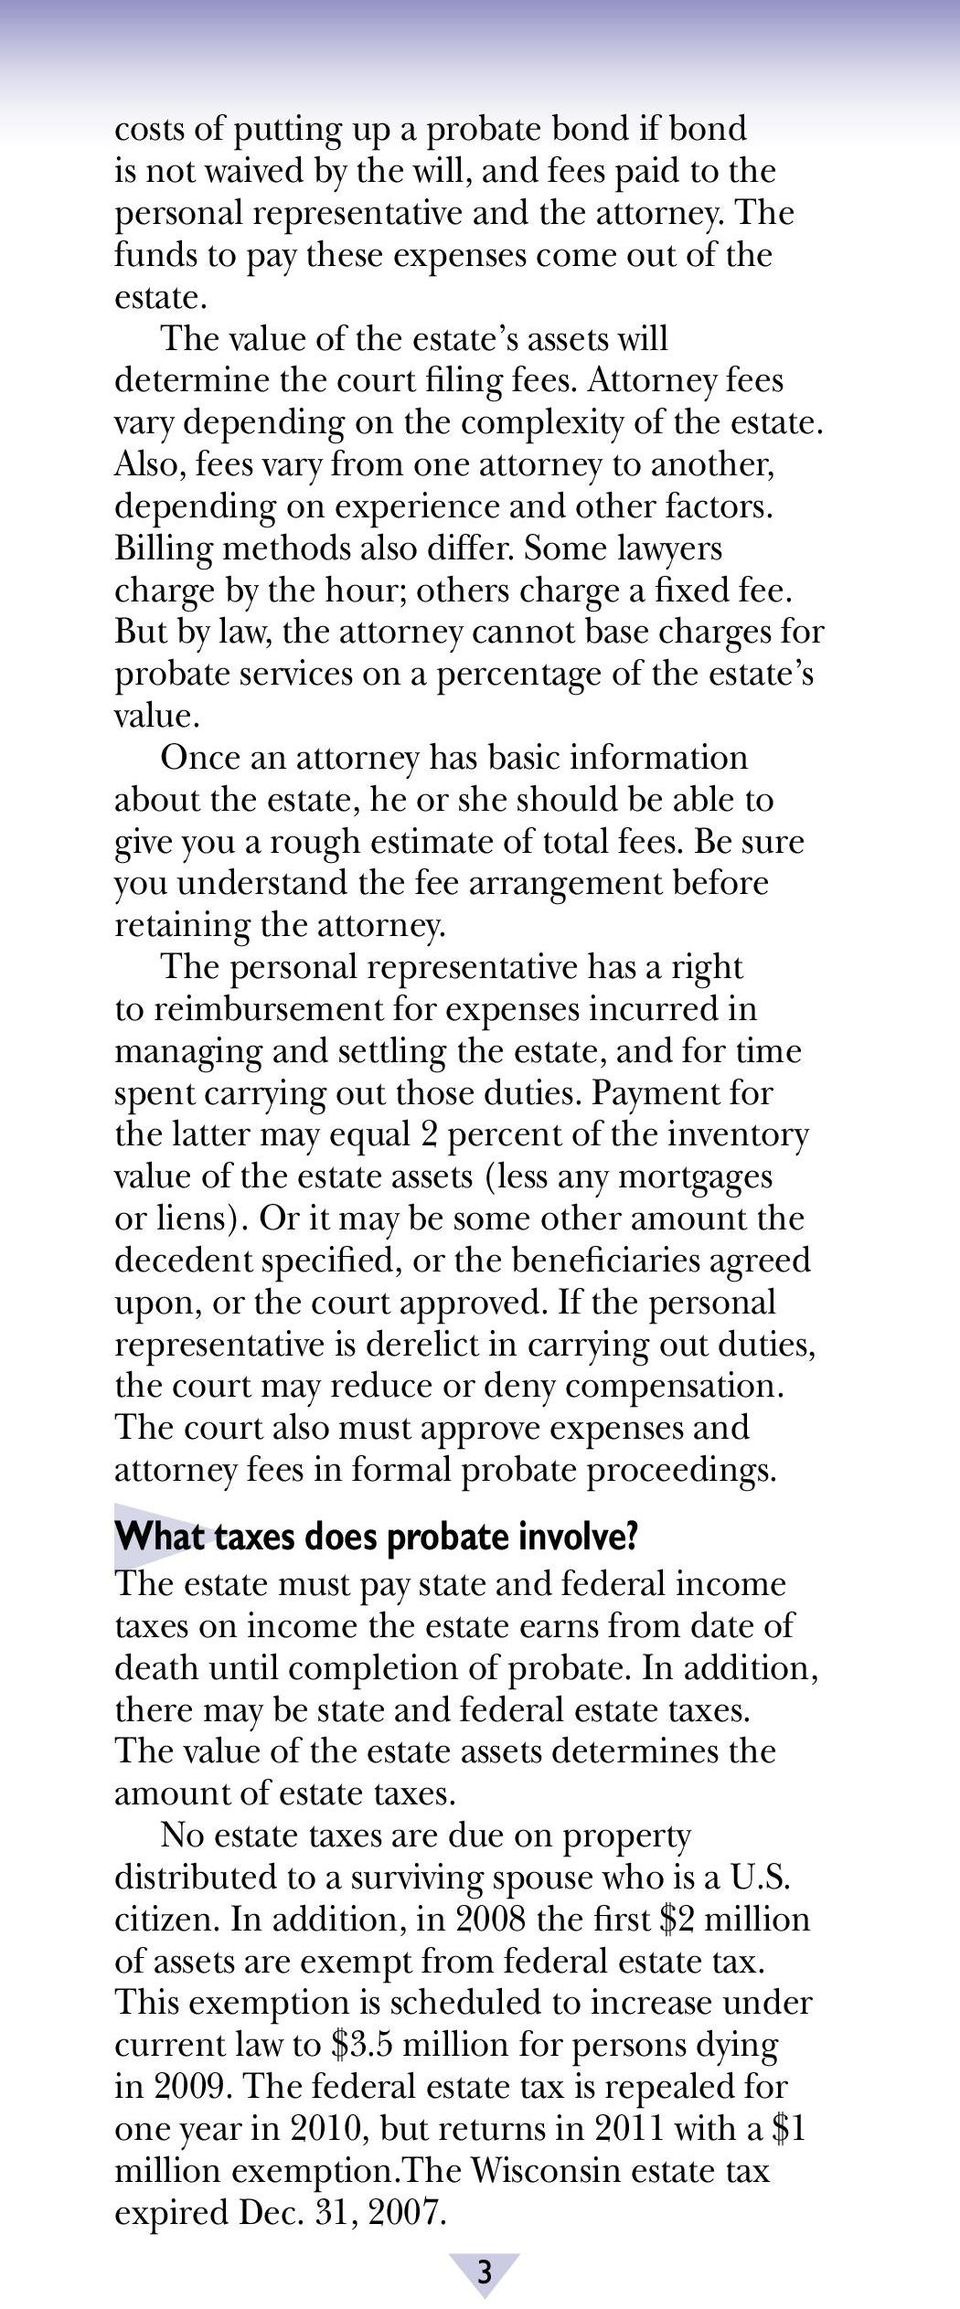 Also, fees vary from one attorney to another, depending on experience and other factors. Billing methods also differ. Some lawyers charge by the hour; others charge a fixed fee.